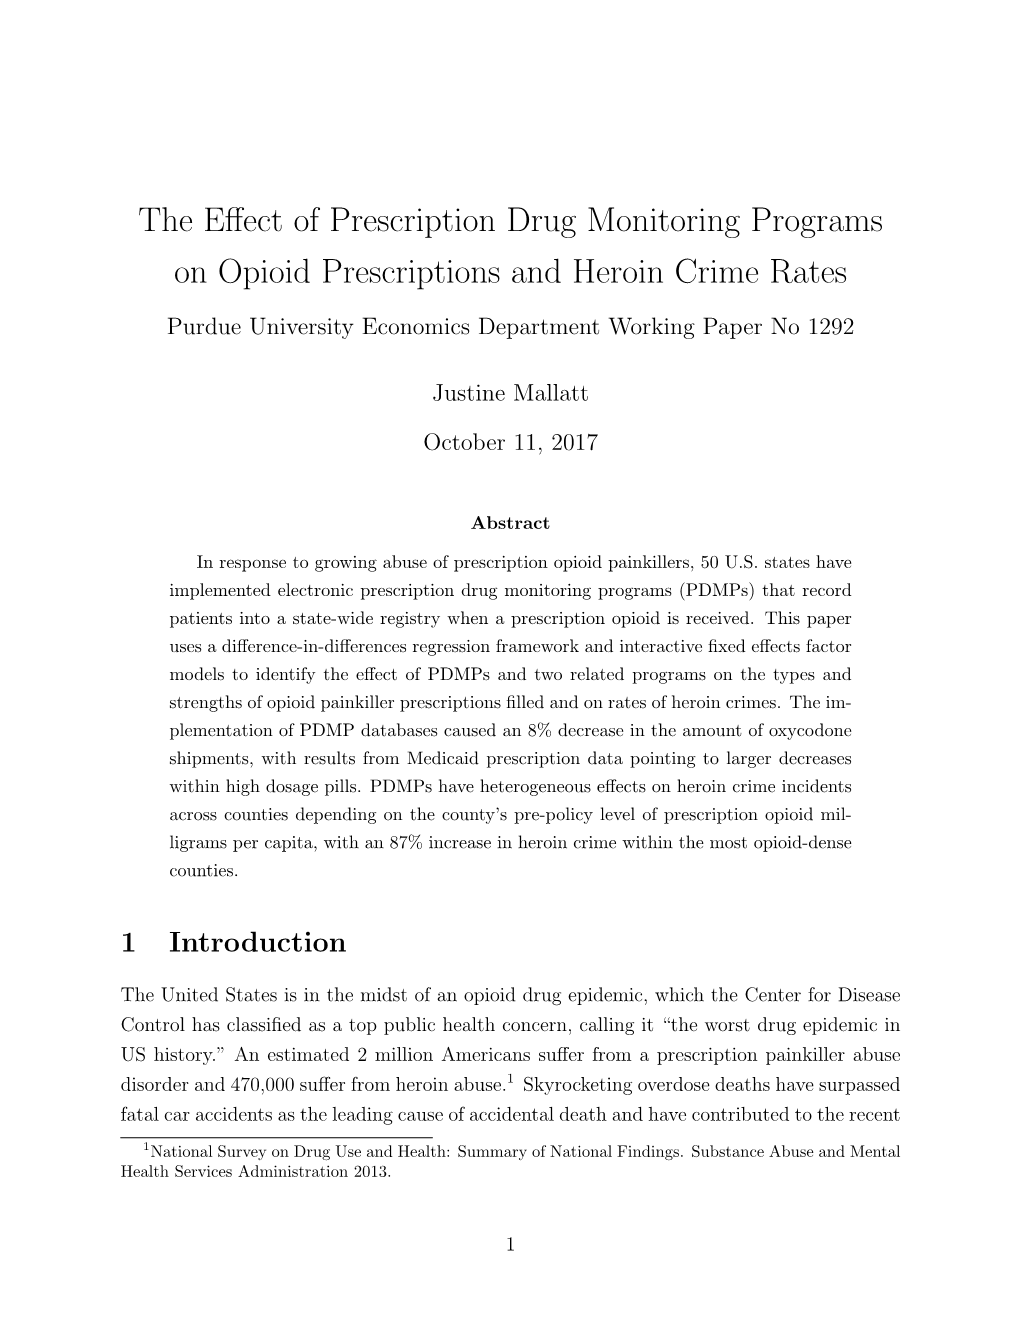 The Effect of Prescription Drug Monitoring Programs on Opioid